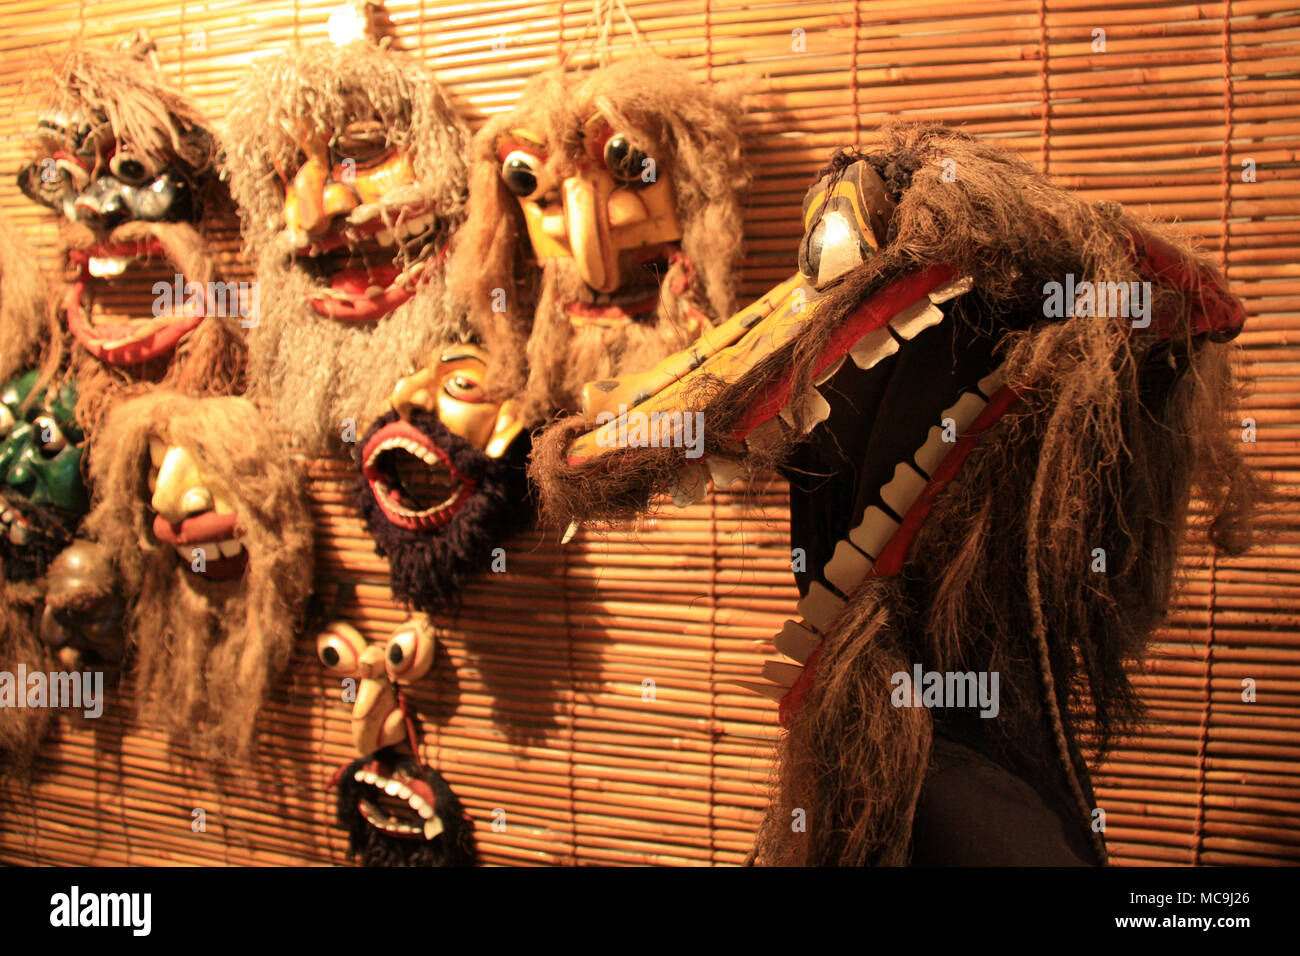 Wooden masks and puppets in the Ambalangoda Mask Museum in Sri Lanka Stock Photo